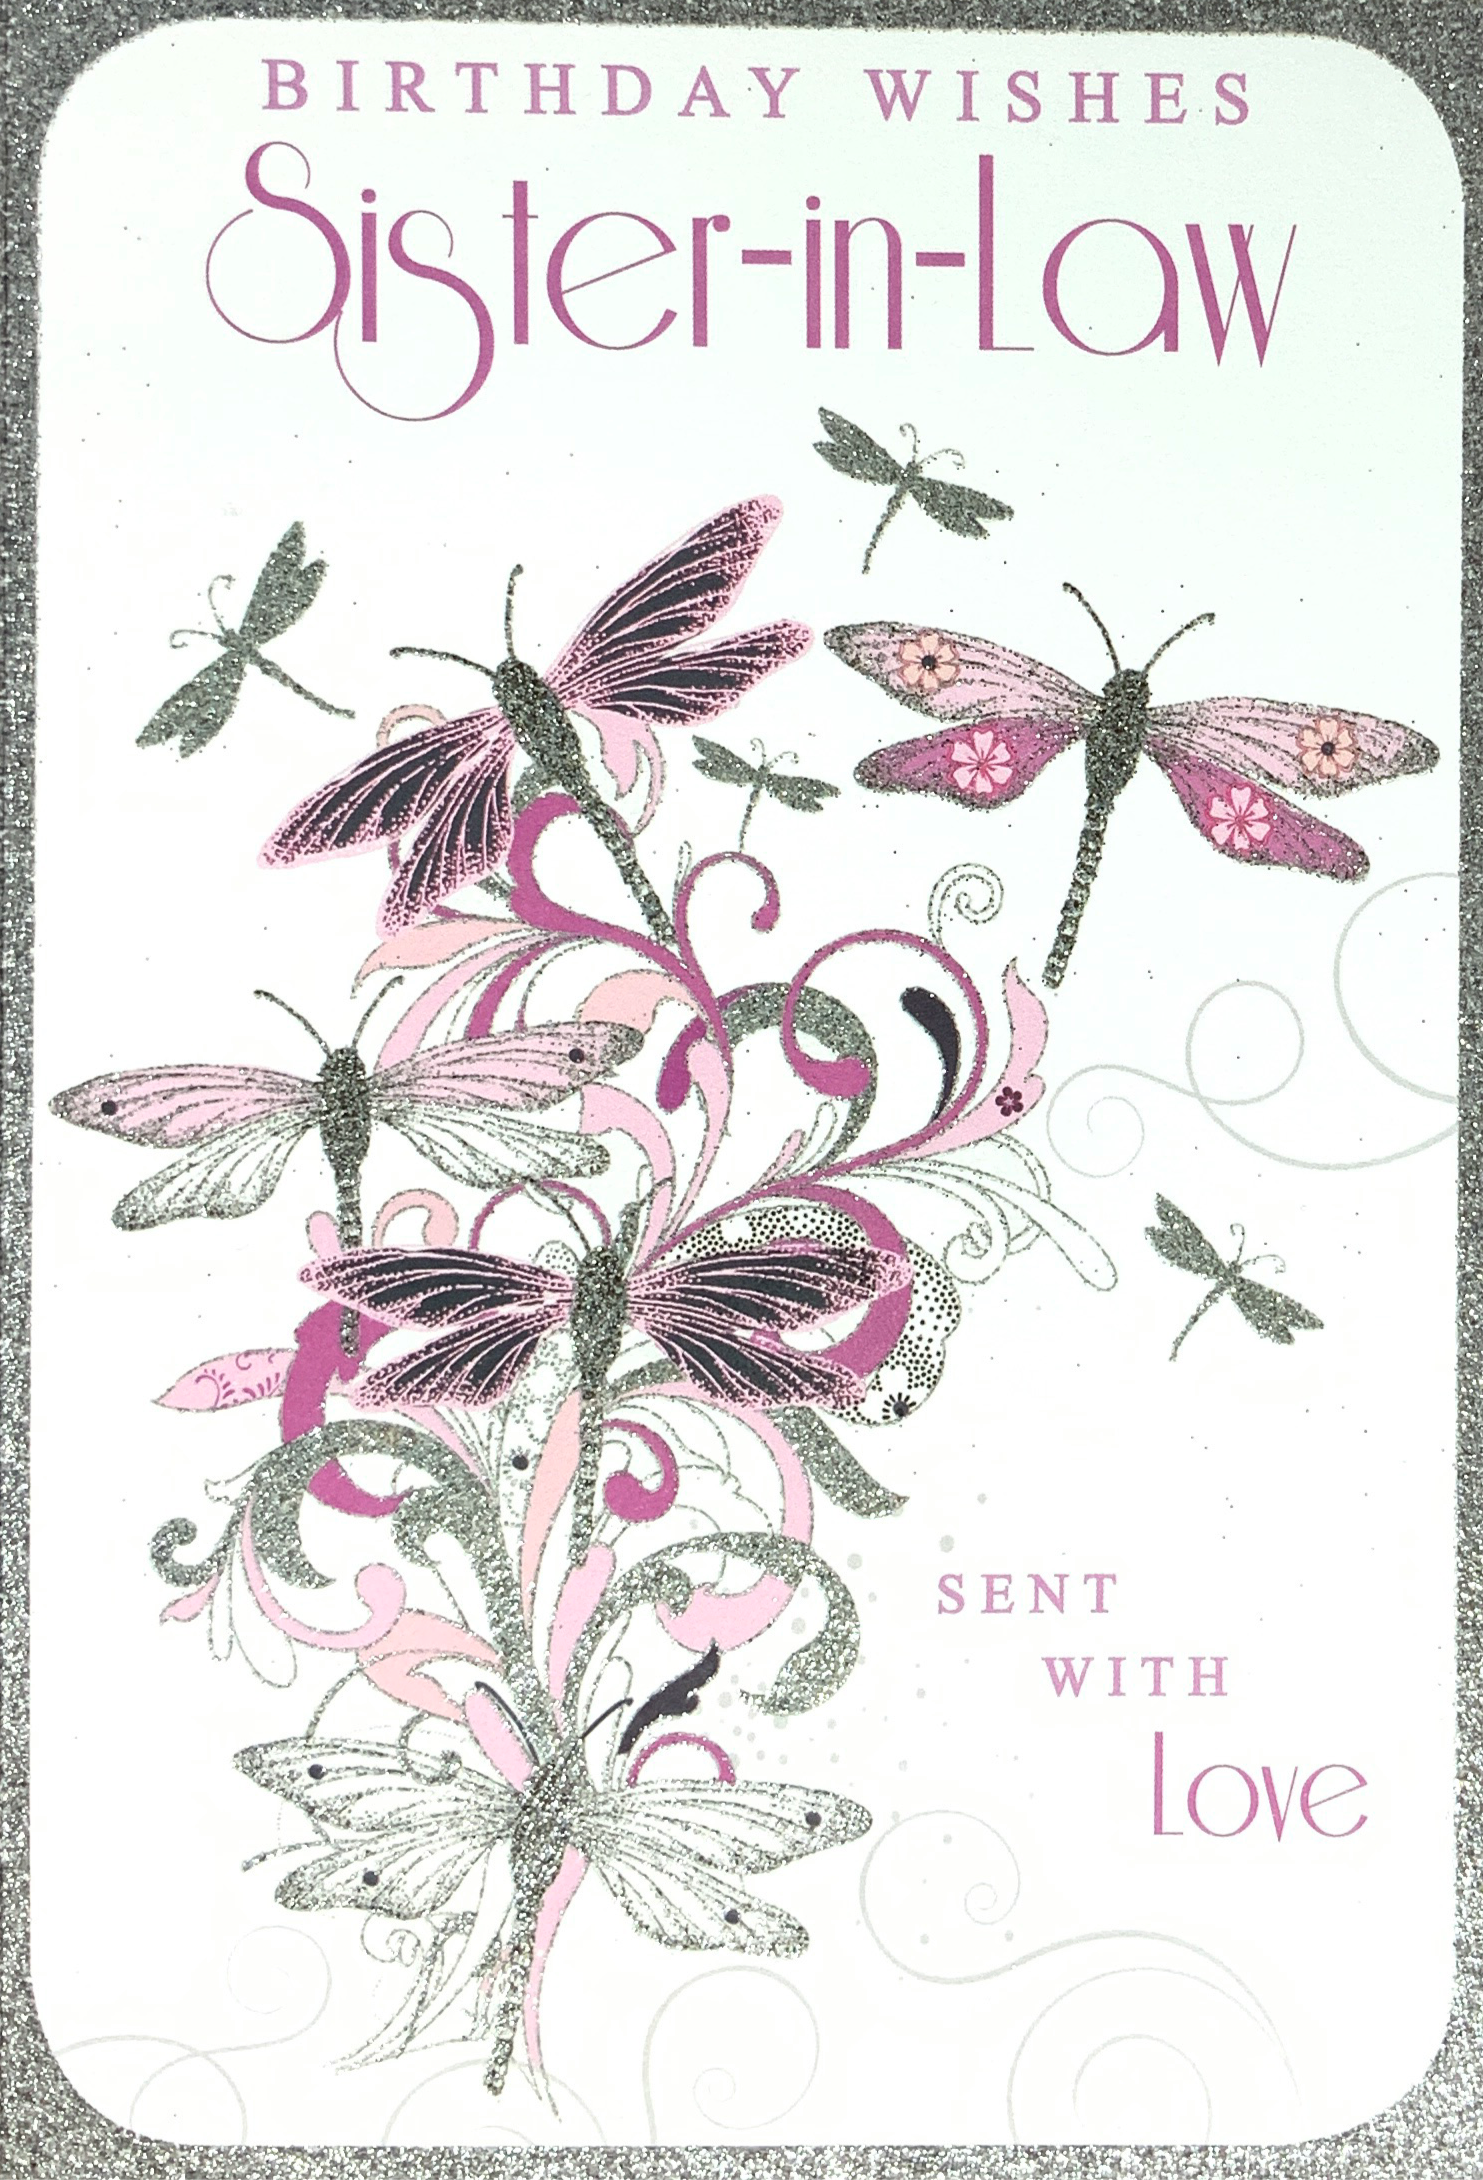 Birthday Card - Sister-in-Law / Dragonfly Swirls With Glitter